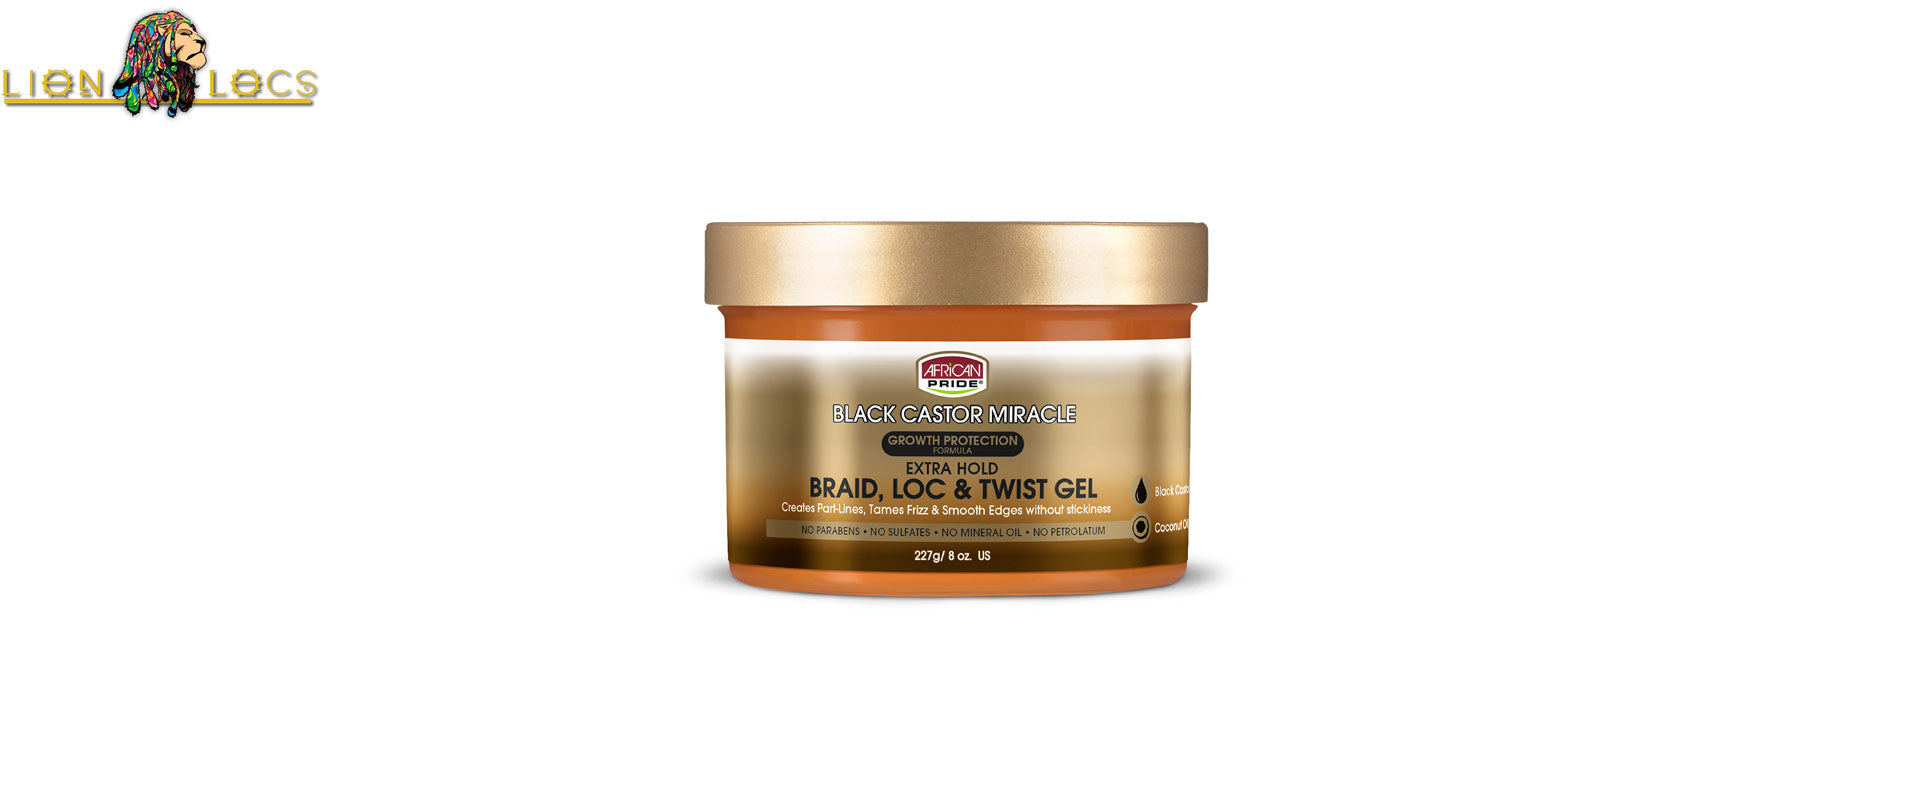 African Pride Black Castor Miracle Gel Review: Top Styling Aid